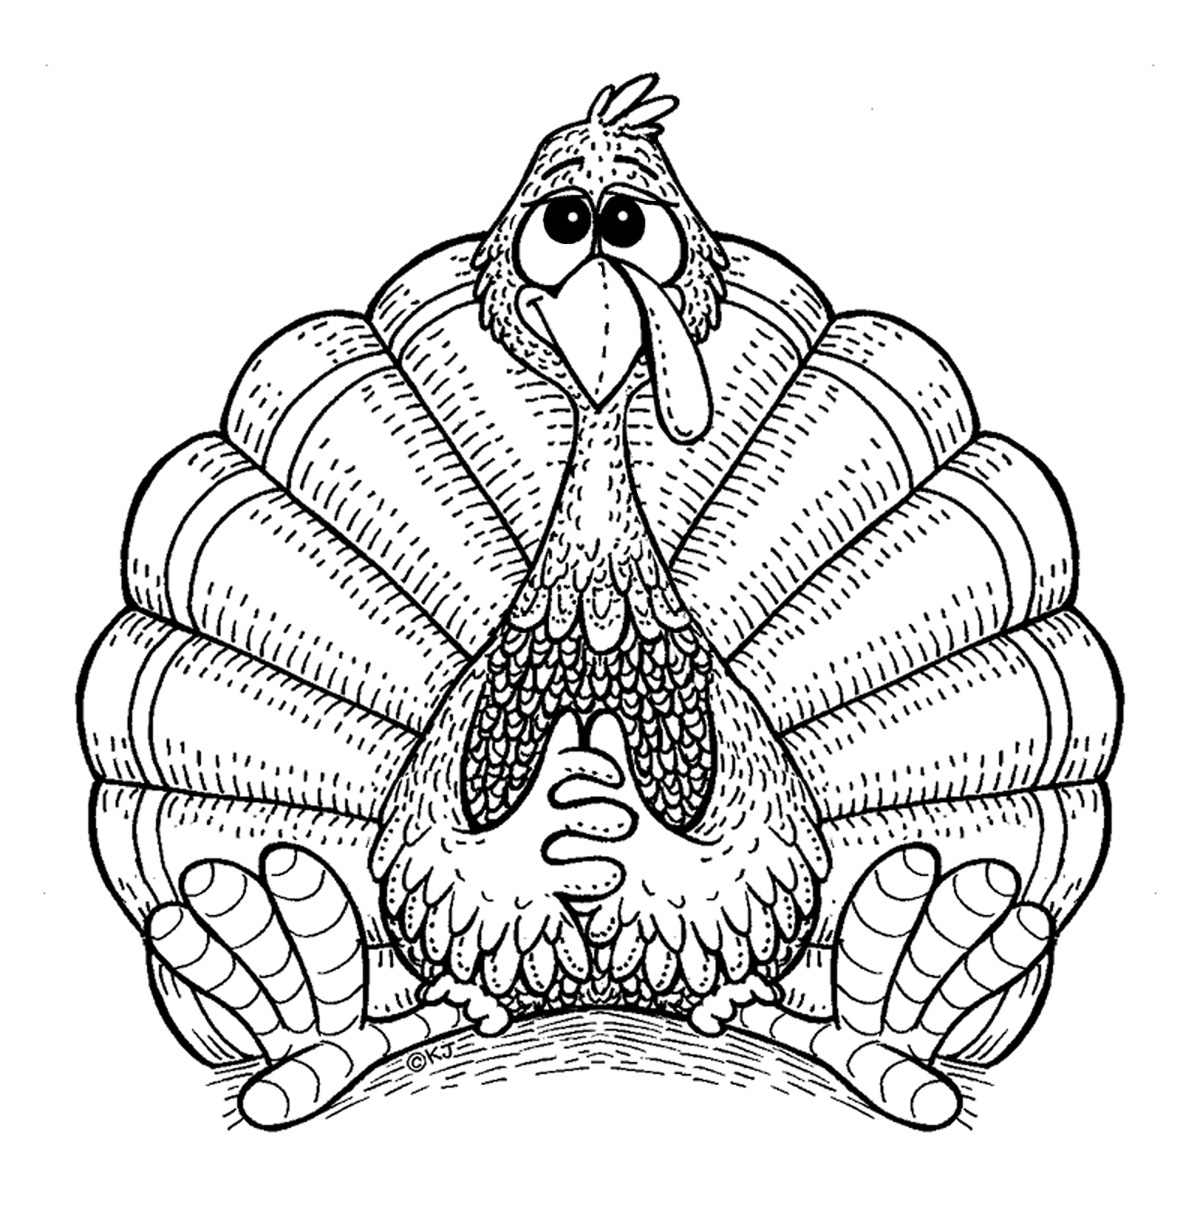 Hand Turkey Coloring Pages at GetColorings.com | Free printable